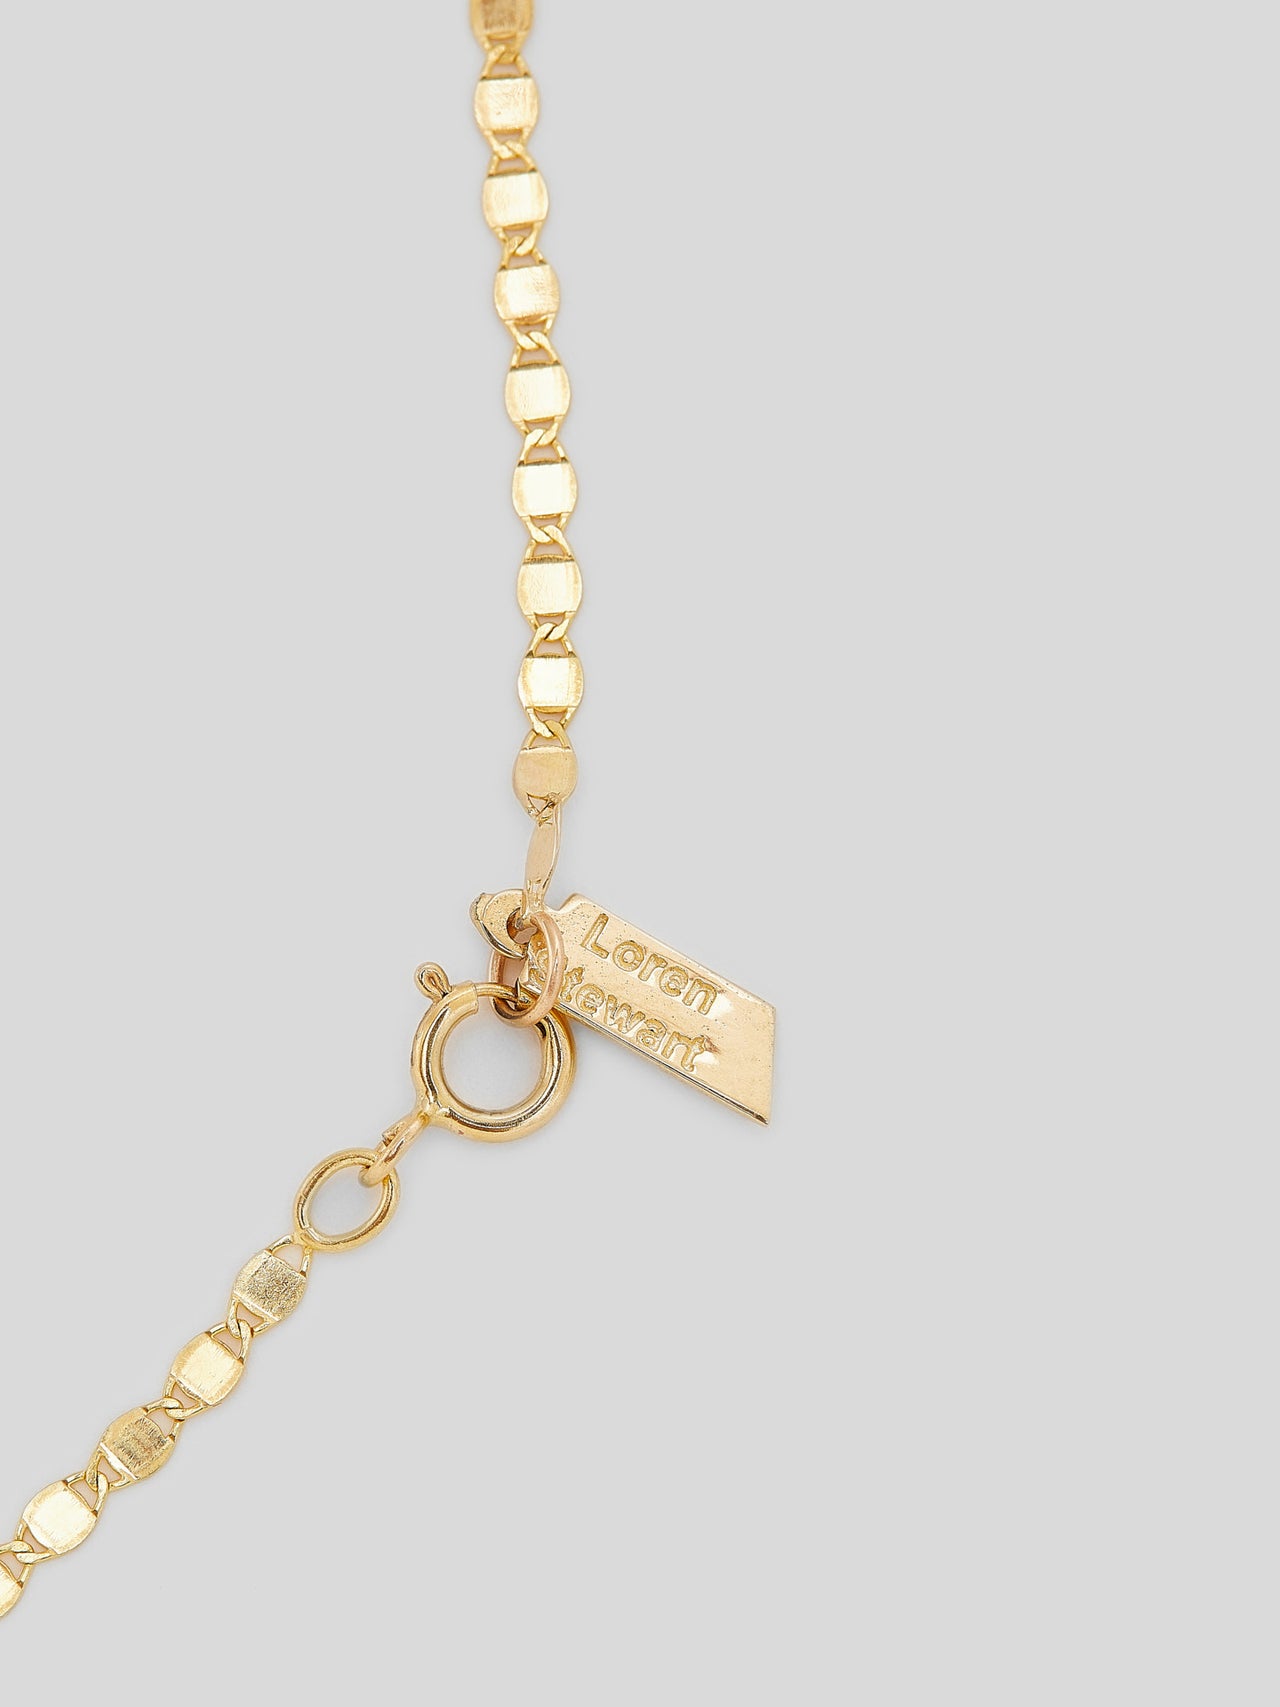 Close up of clasp and logo on Product image of 14kt yellow gold valentino chain bracelet on white background. 